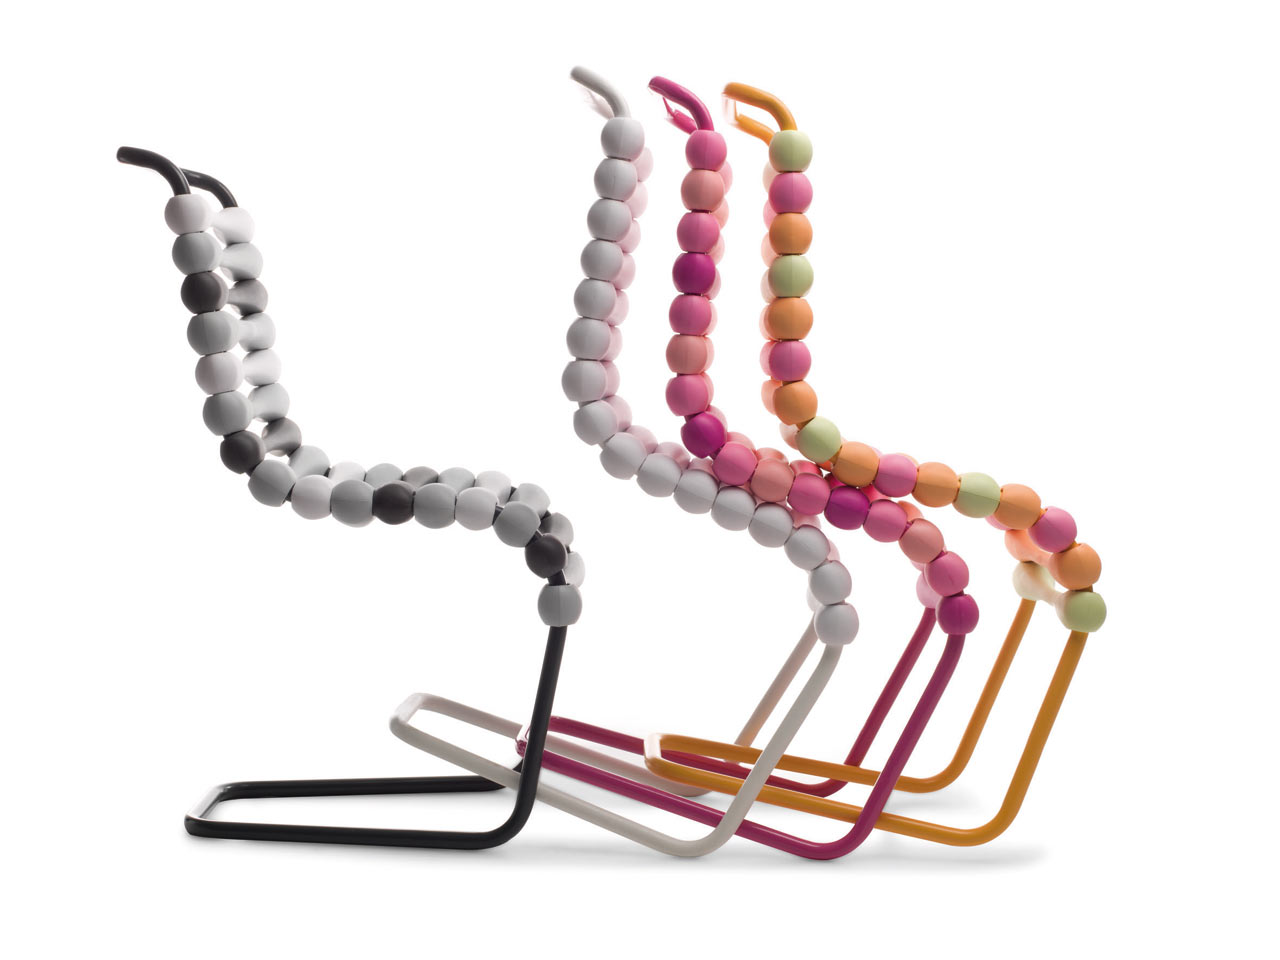 Boing: A Stackable Chair with a Pop Soul by Karim Rashid